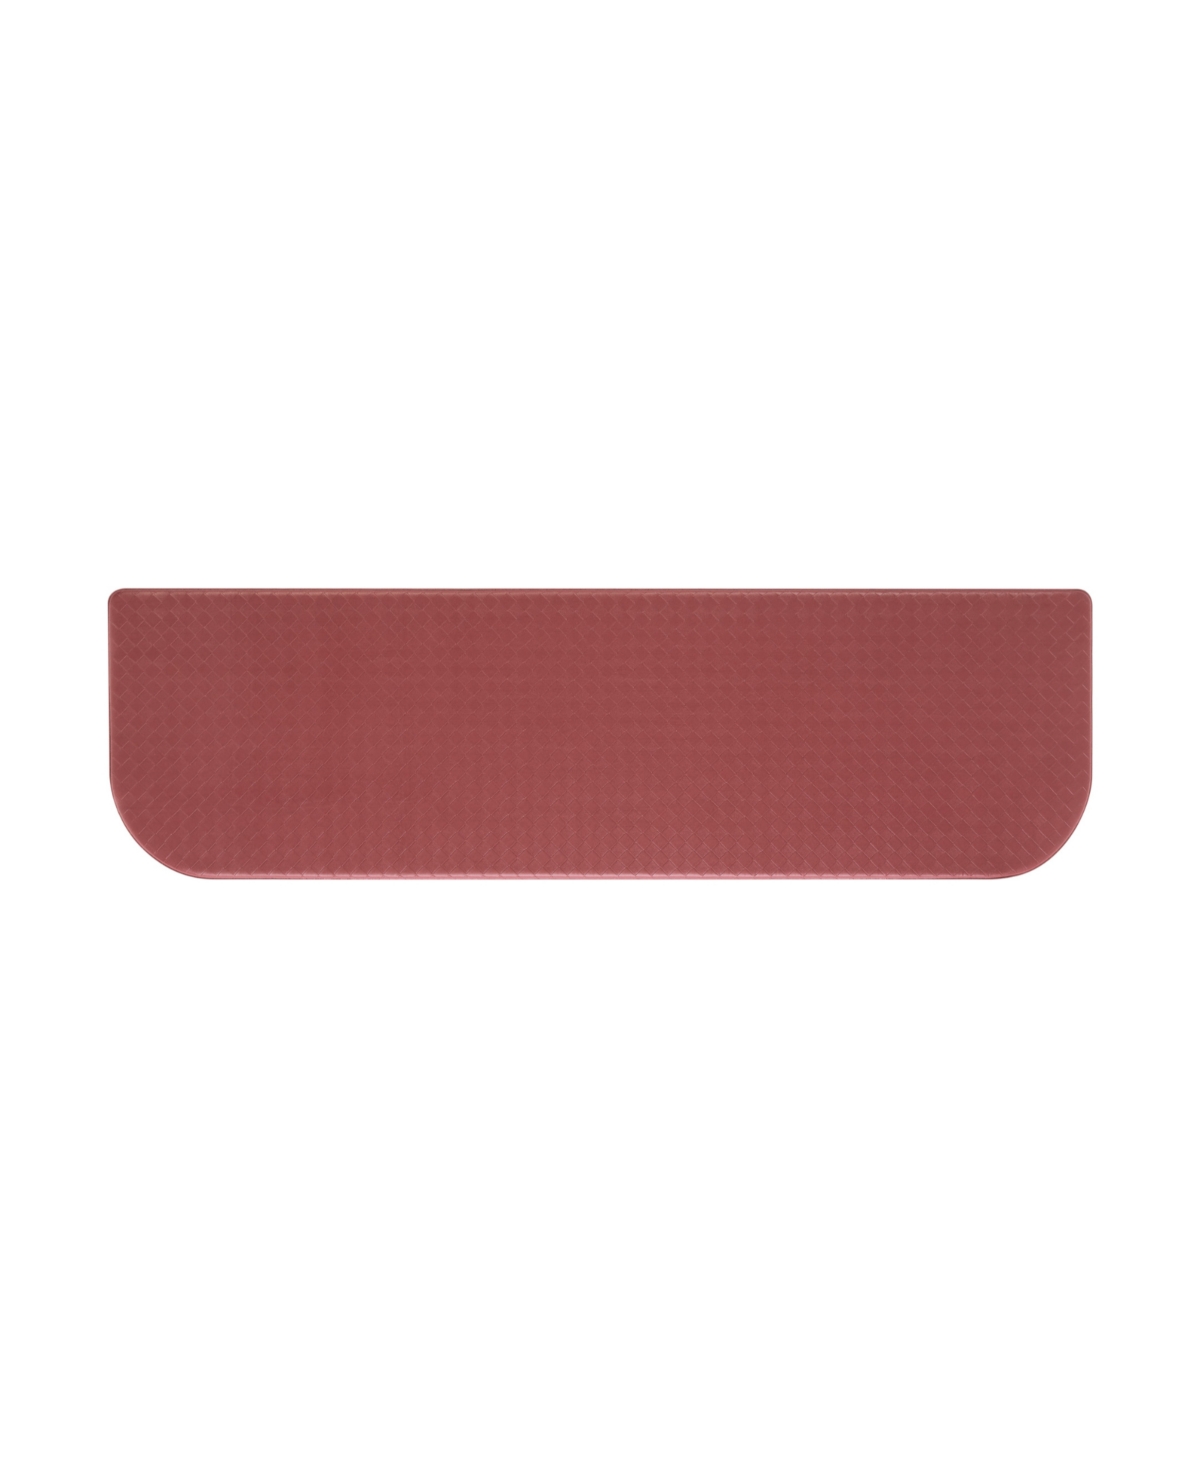 Chef Gear Playa Wedge Fatigue-resistant Kitchen Mat, 17.5" X 60" In Red